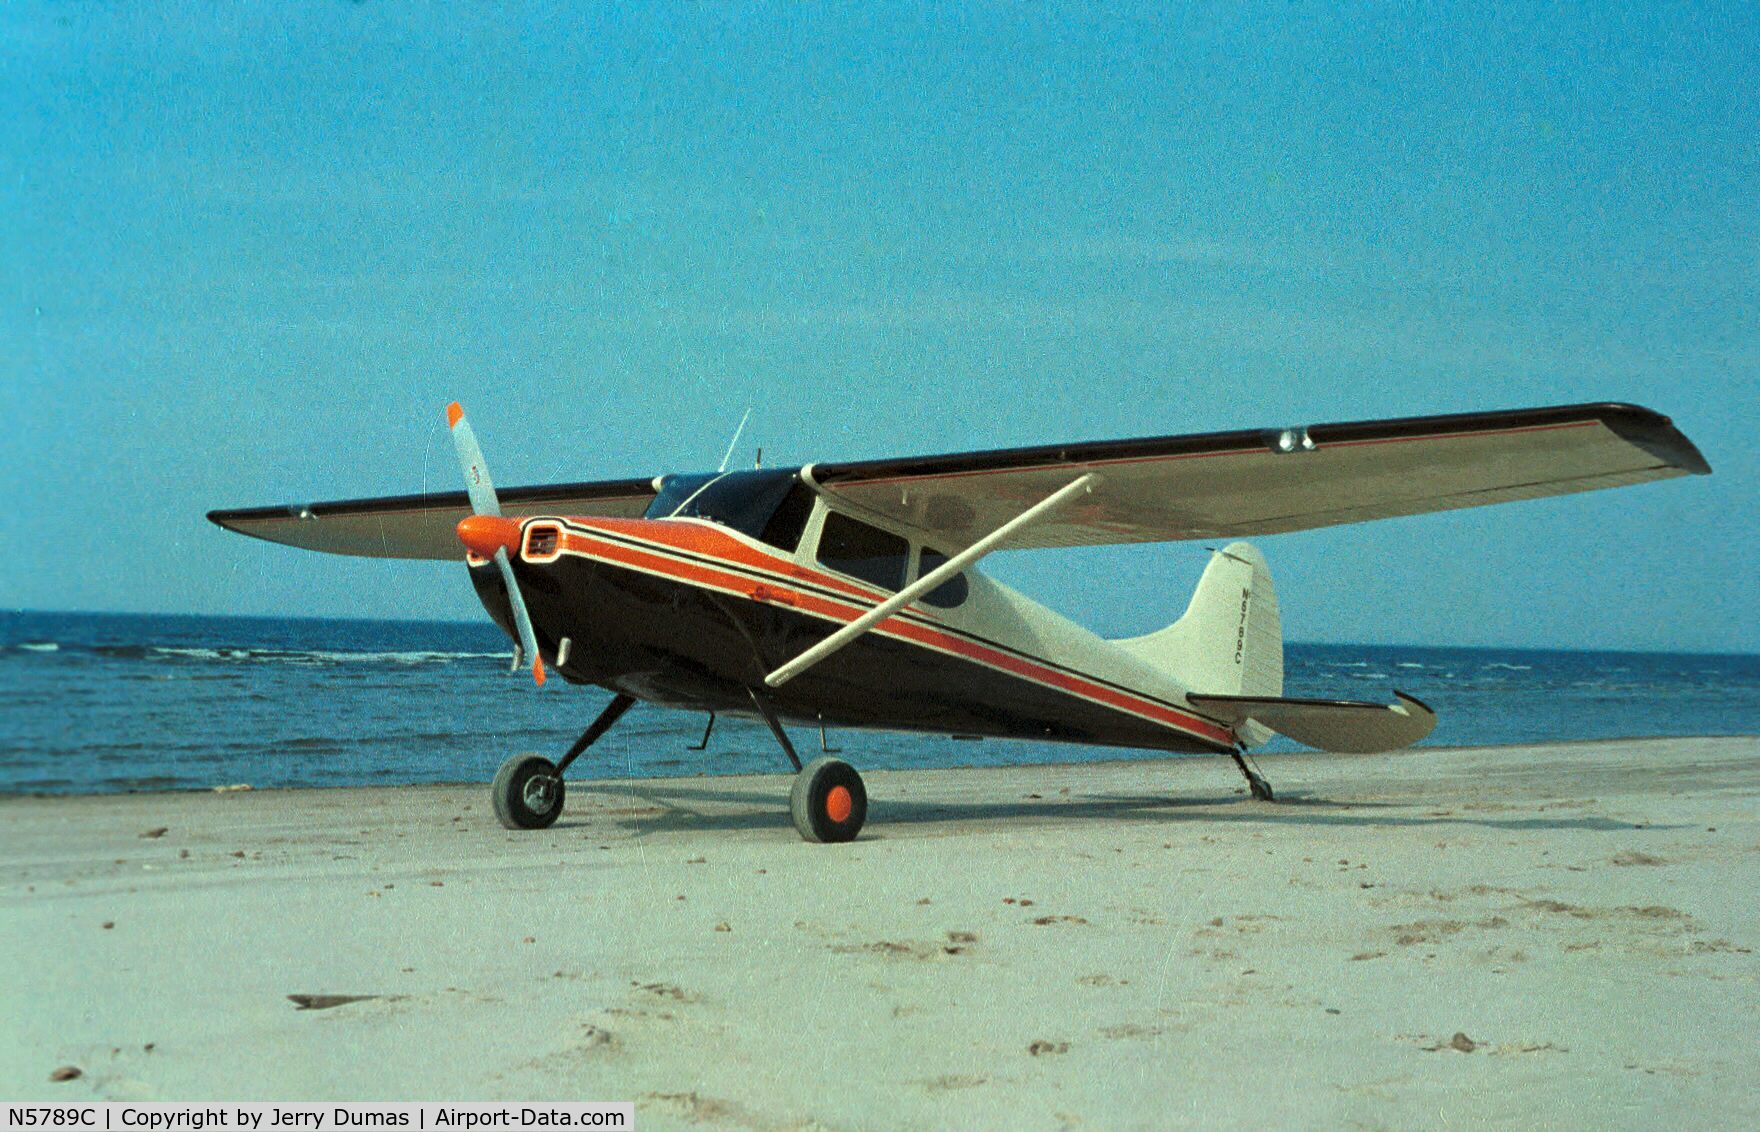 N5789C, 1950 Cessna 170A C/N 19743, Sandy Pond after paint in 1980